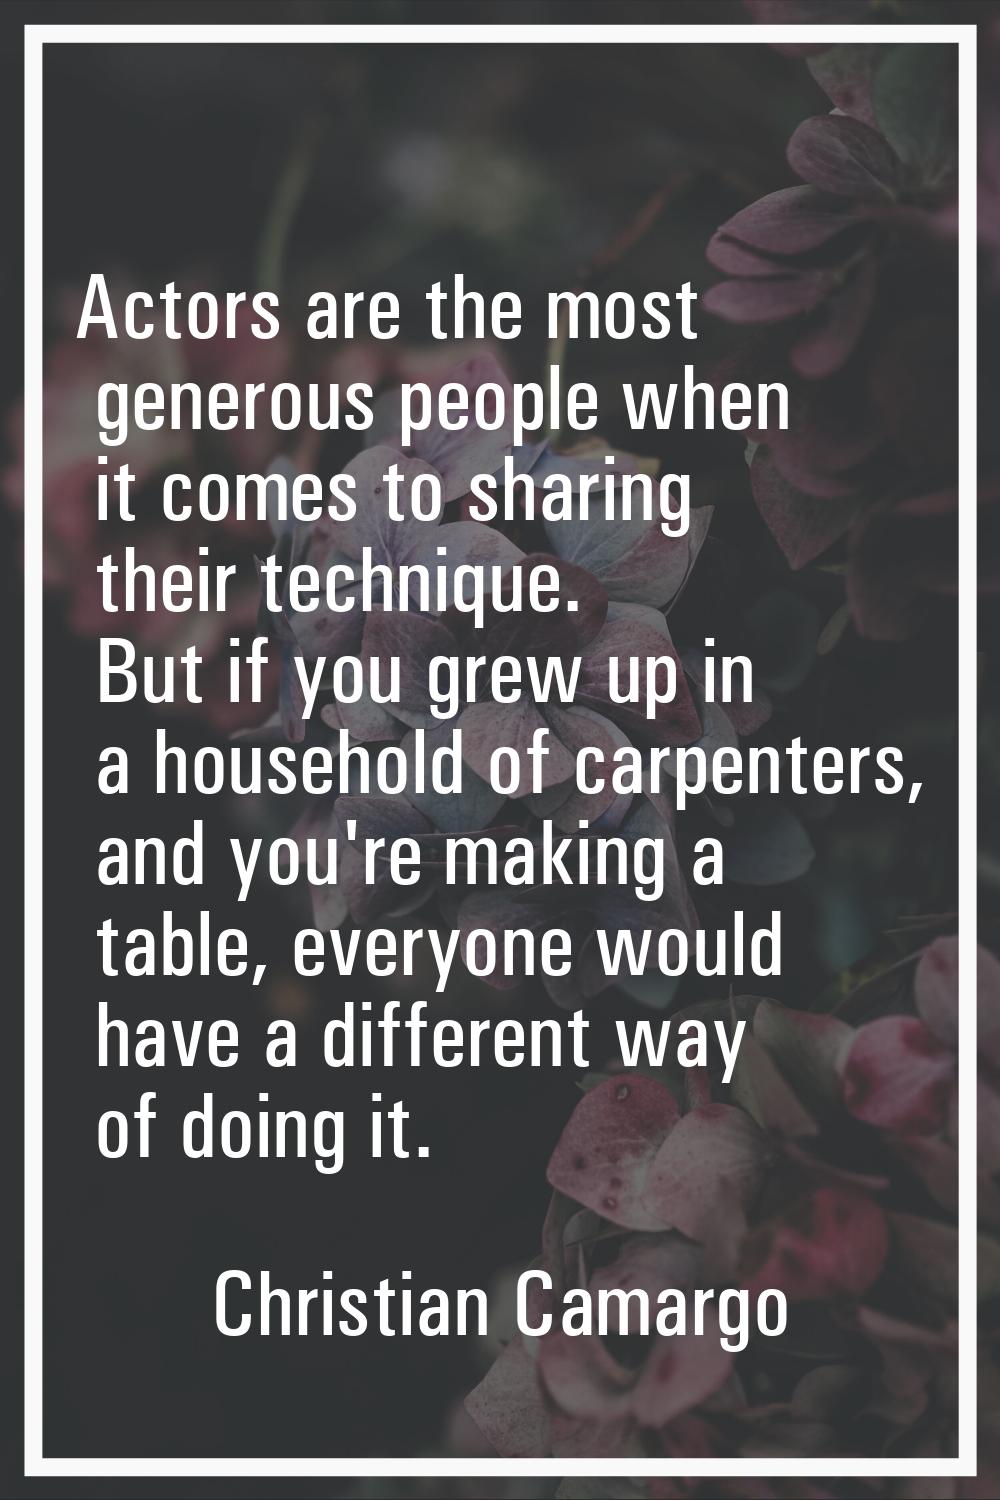 Actors are the most generous people when it comes to sharing their technique. But if you grew up in